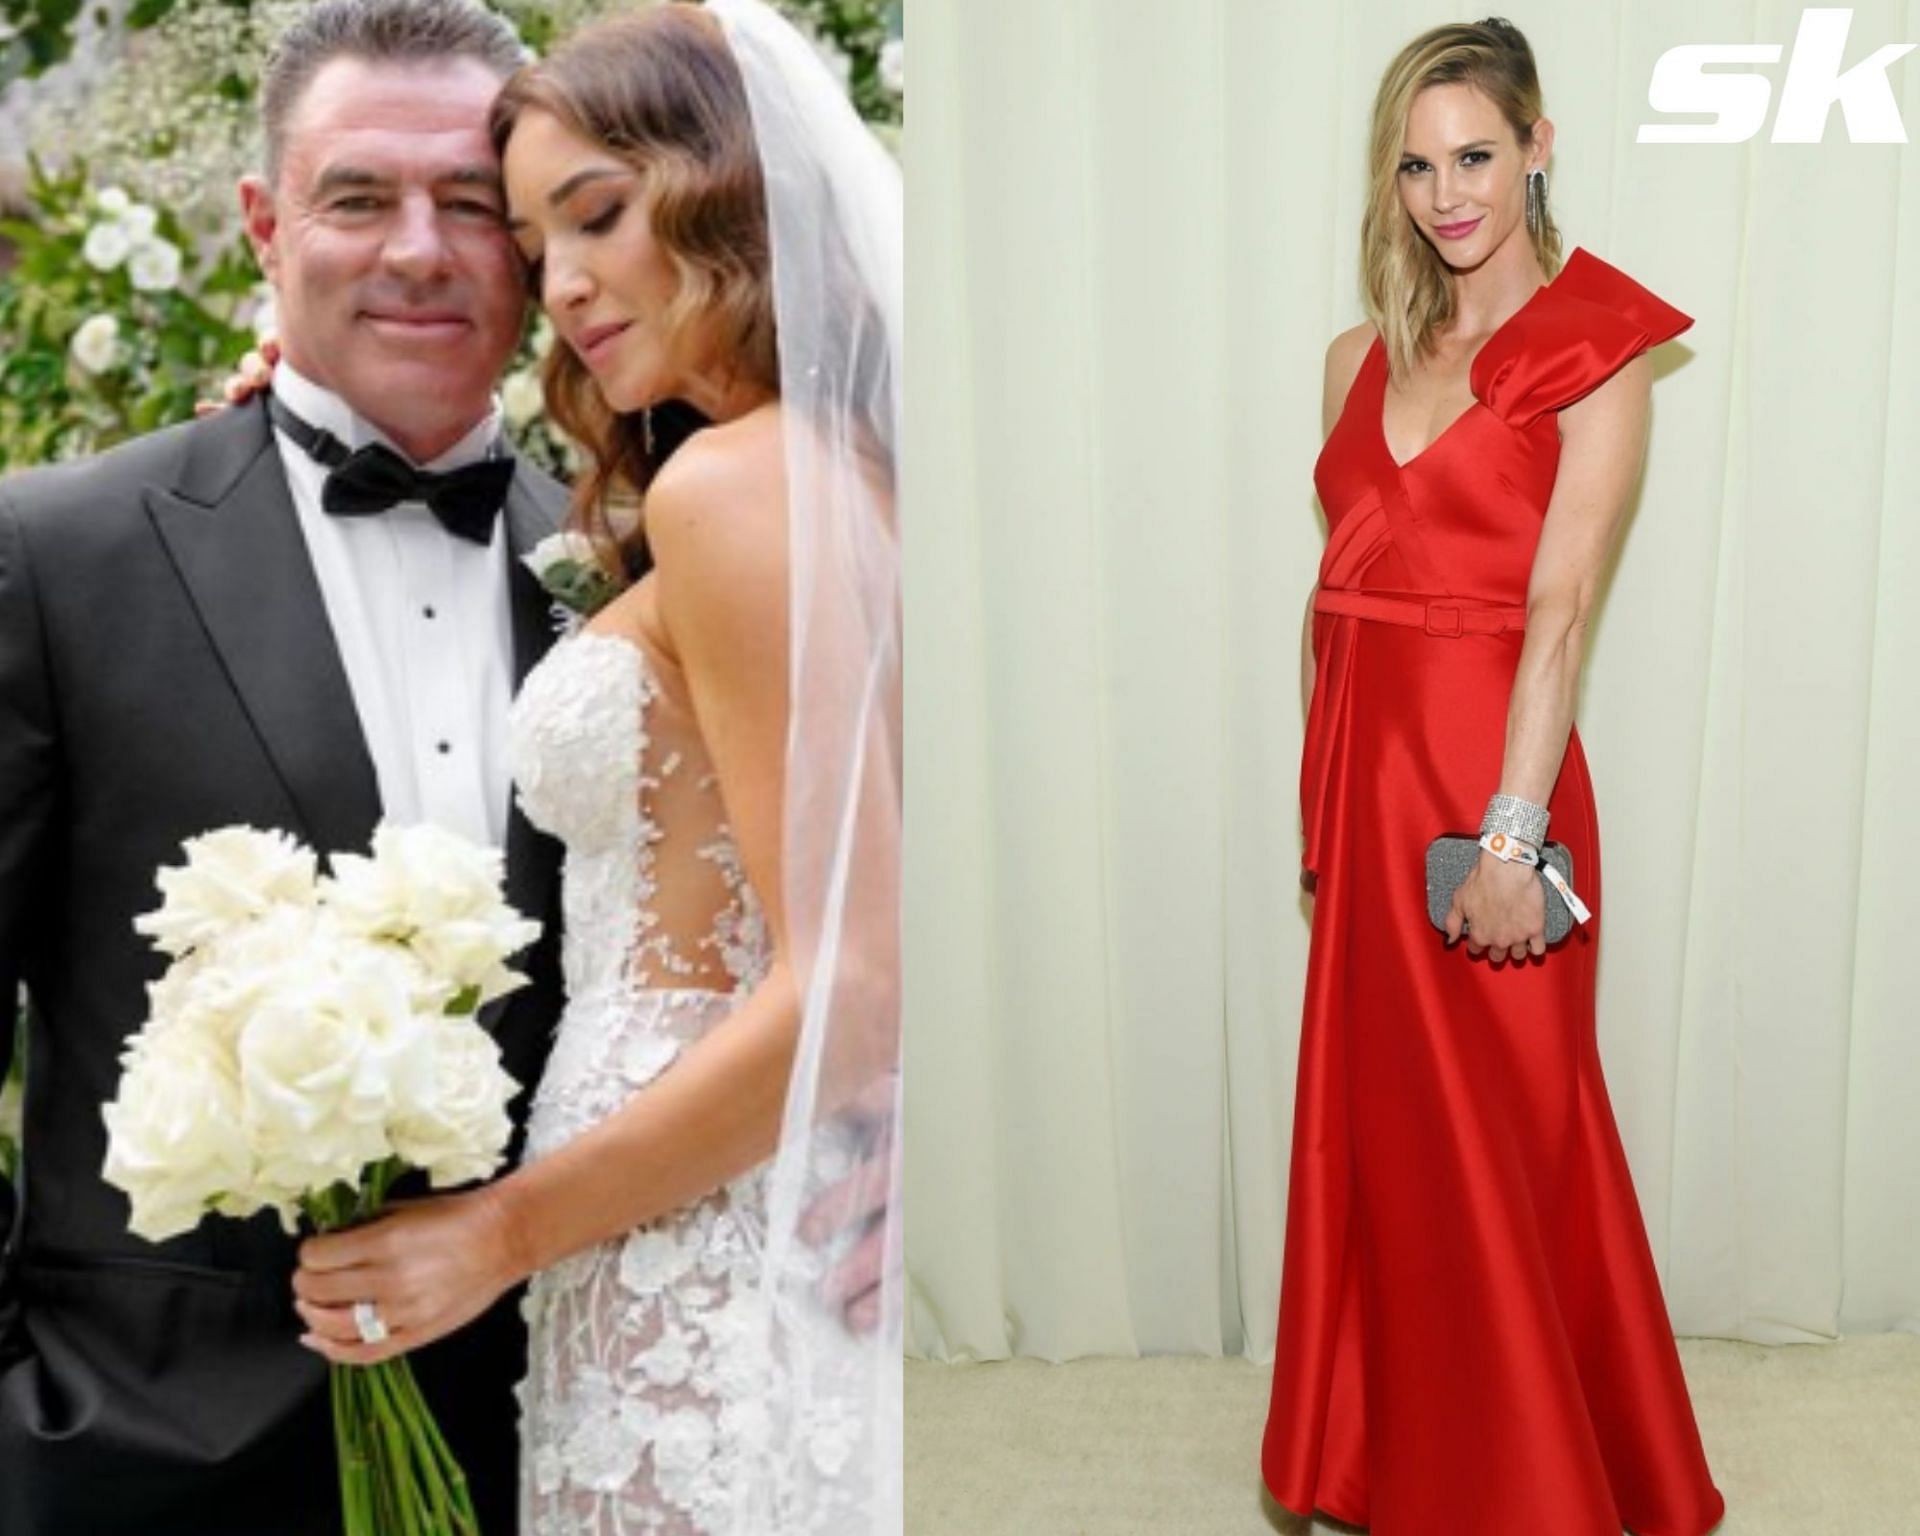 His wedding day was also the best day of my life" - Meghan King rejoices ex-husband and MLB star Jim Edmonds' wedding to Kortnie O'Connor, longs for their stability for the well-being